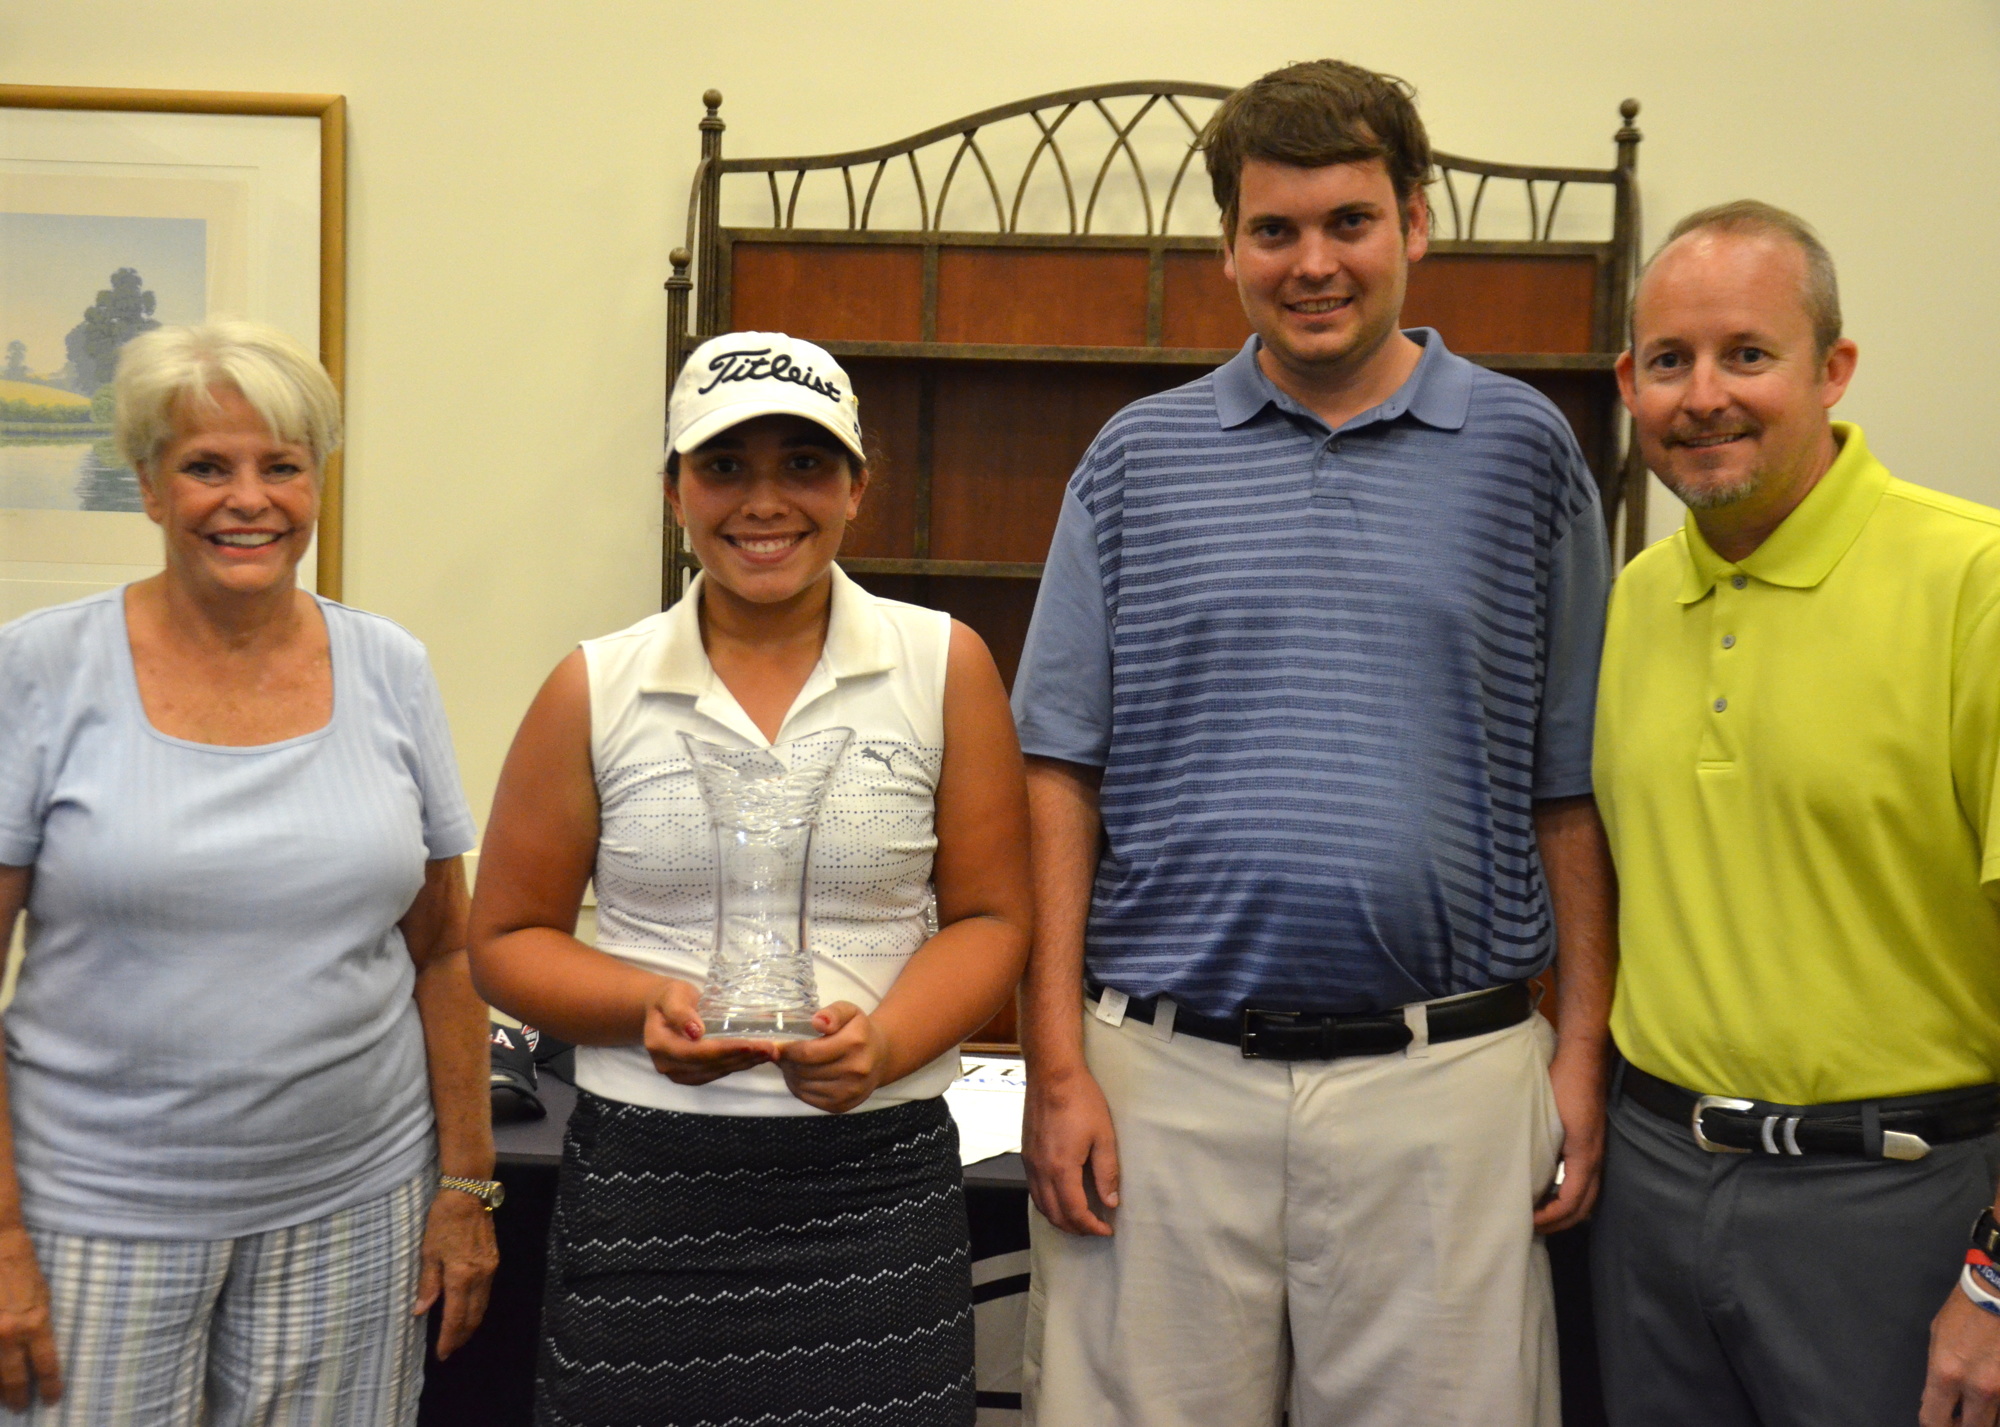 Apopka’s Izzy Pellot, 12, won the Girls Division and is pictured with members of the Bell family.